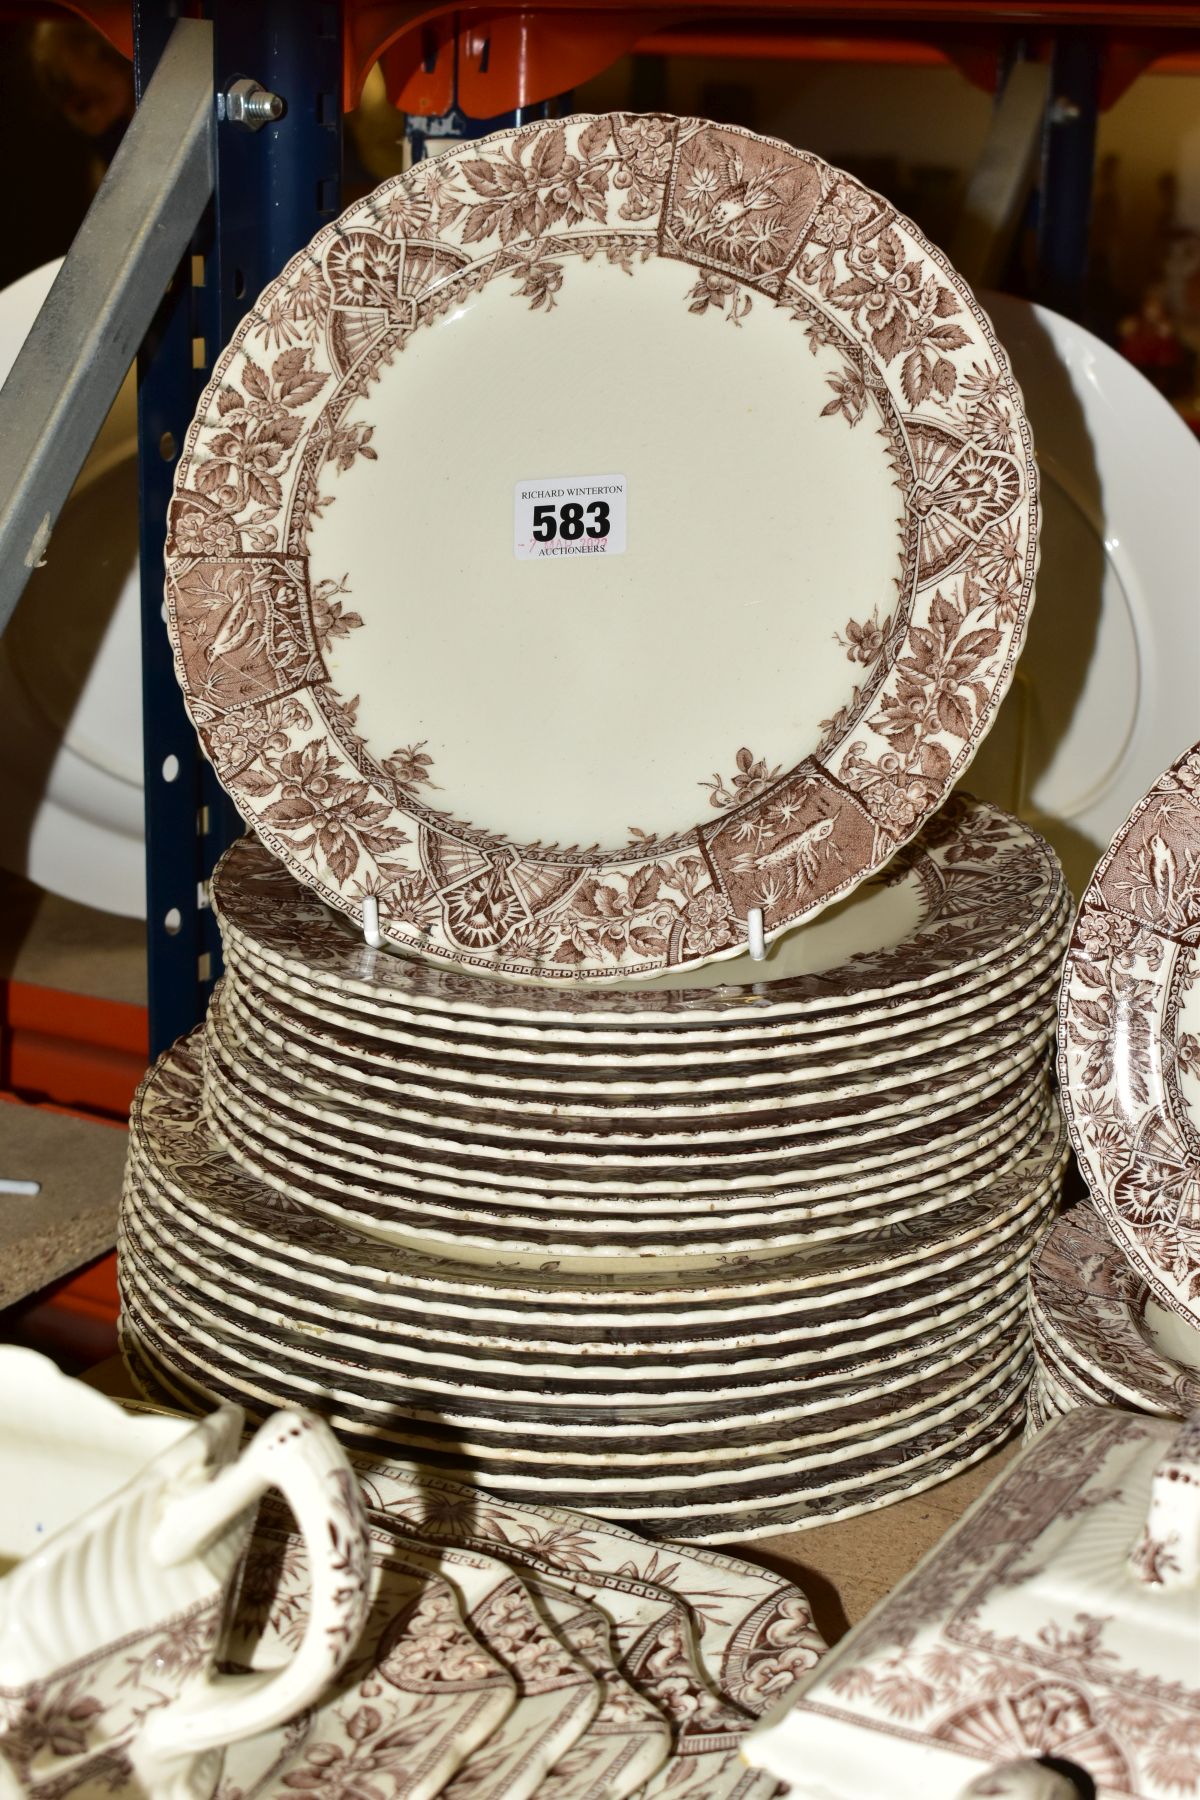 A LATE VICTORIAN EARTHENWARE DINNER SERVICE TRANSFER PRINTED IN BROWN WITH AN AESTHETIC STYLE DESIGN - Image 6 of 14